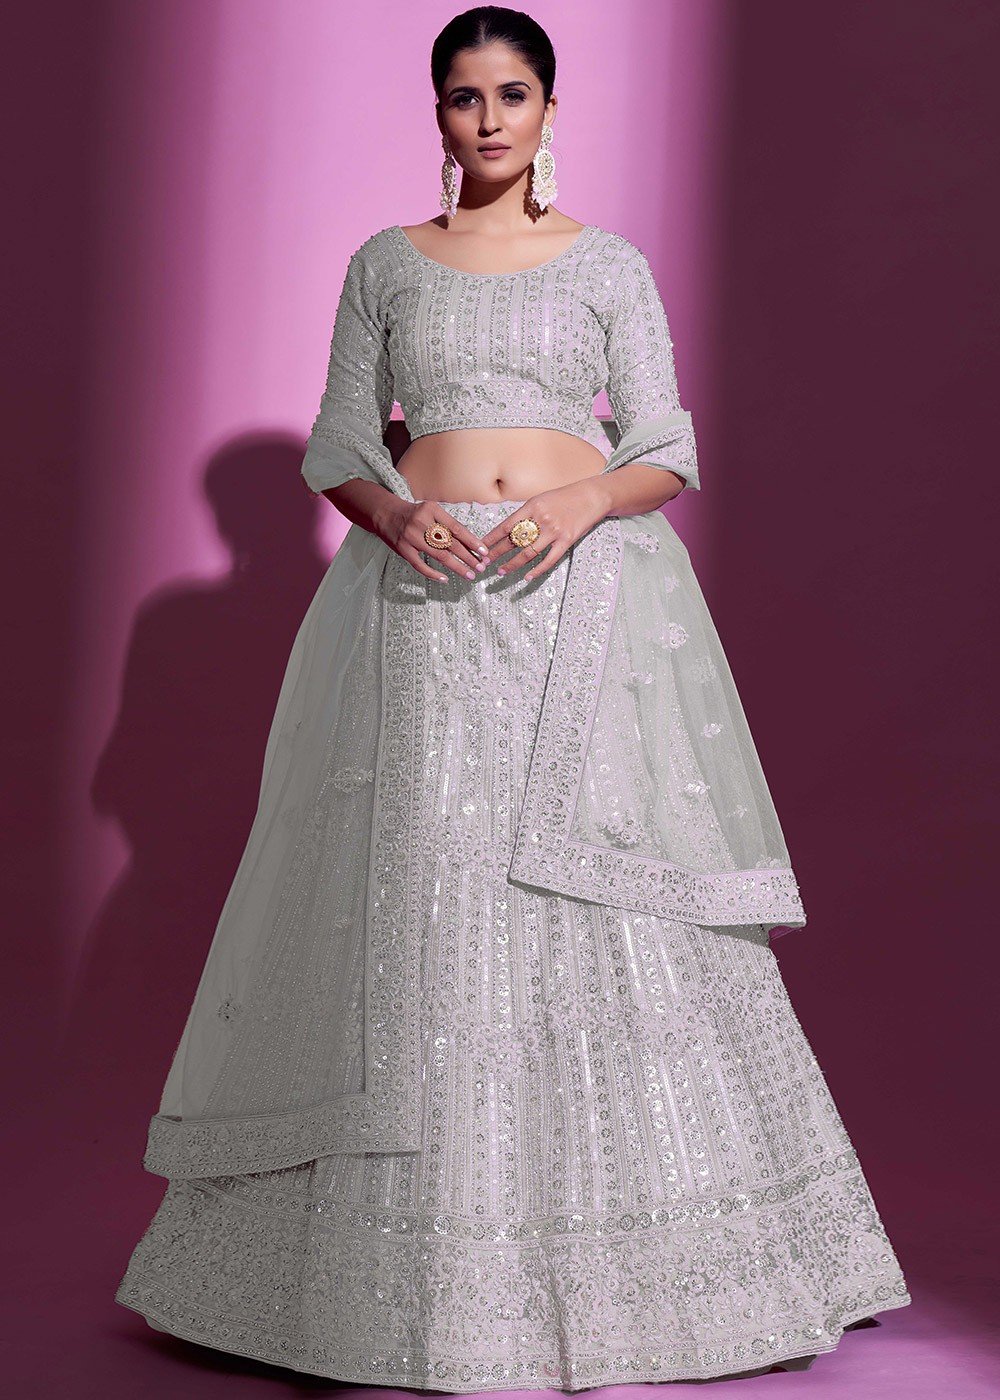 Sonam Kapoor is a vision to behold in a white and silver floral printed  lehenga | Times of India